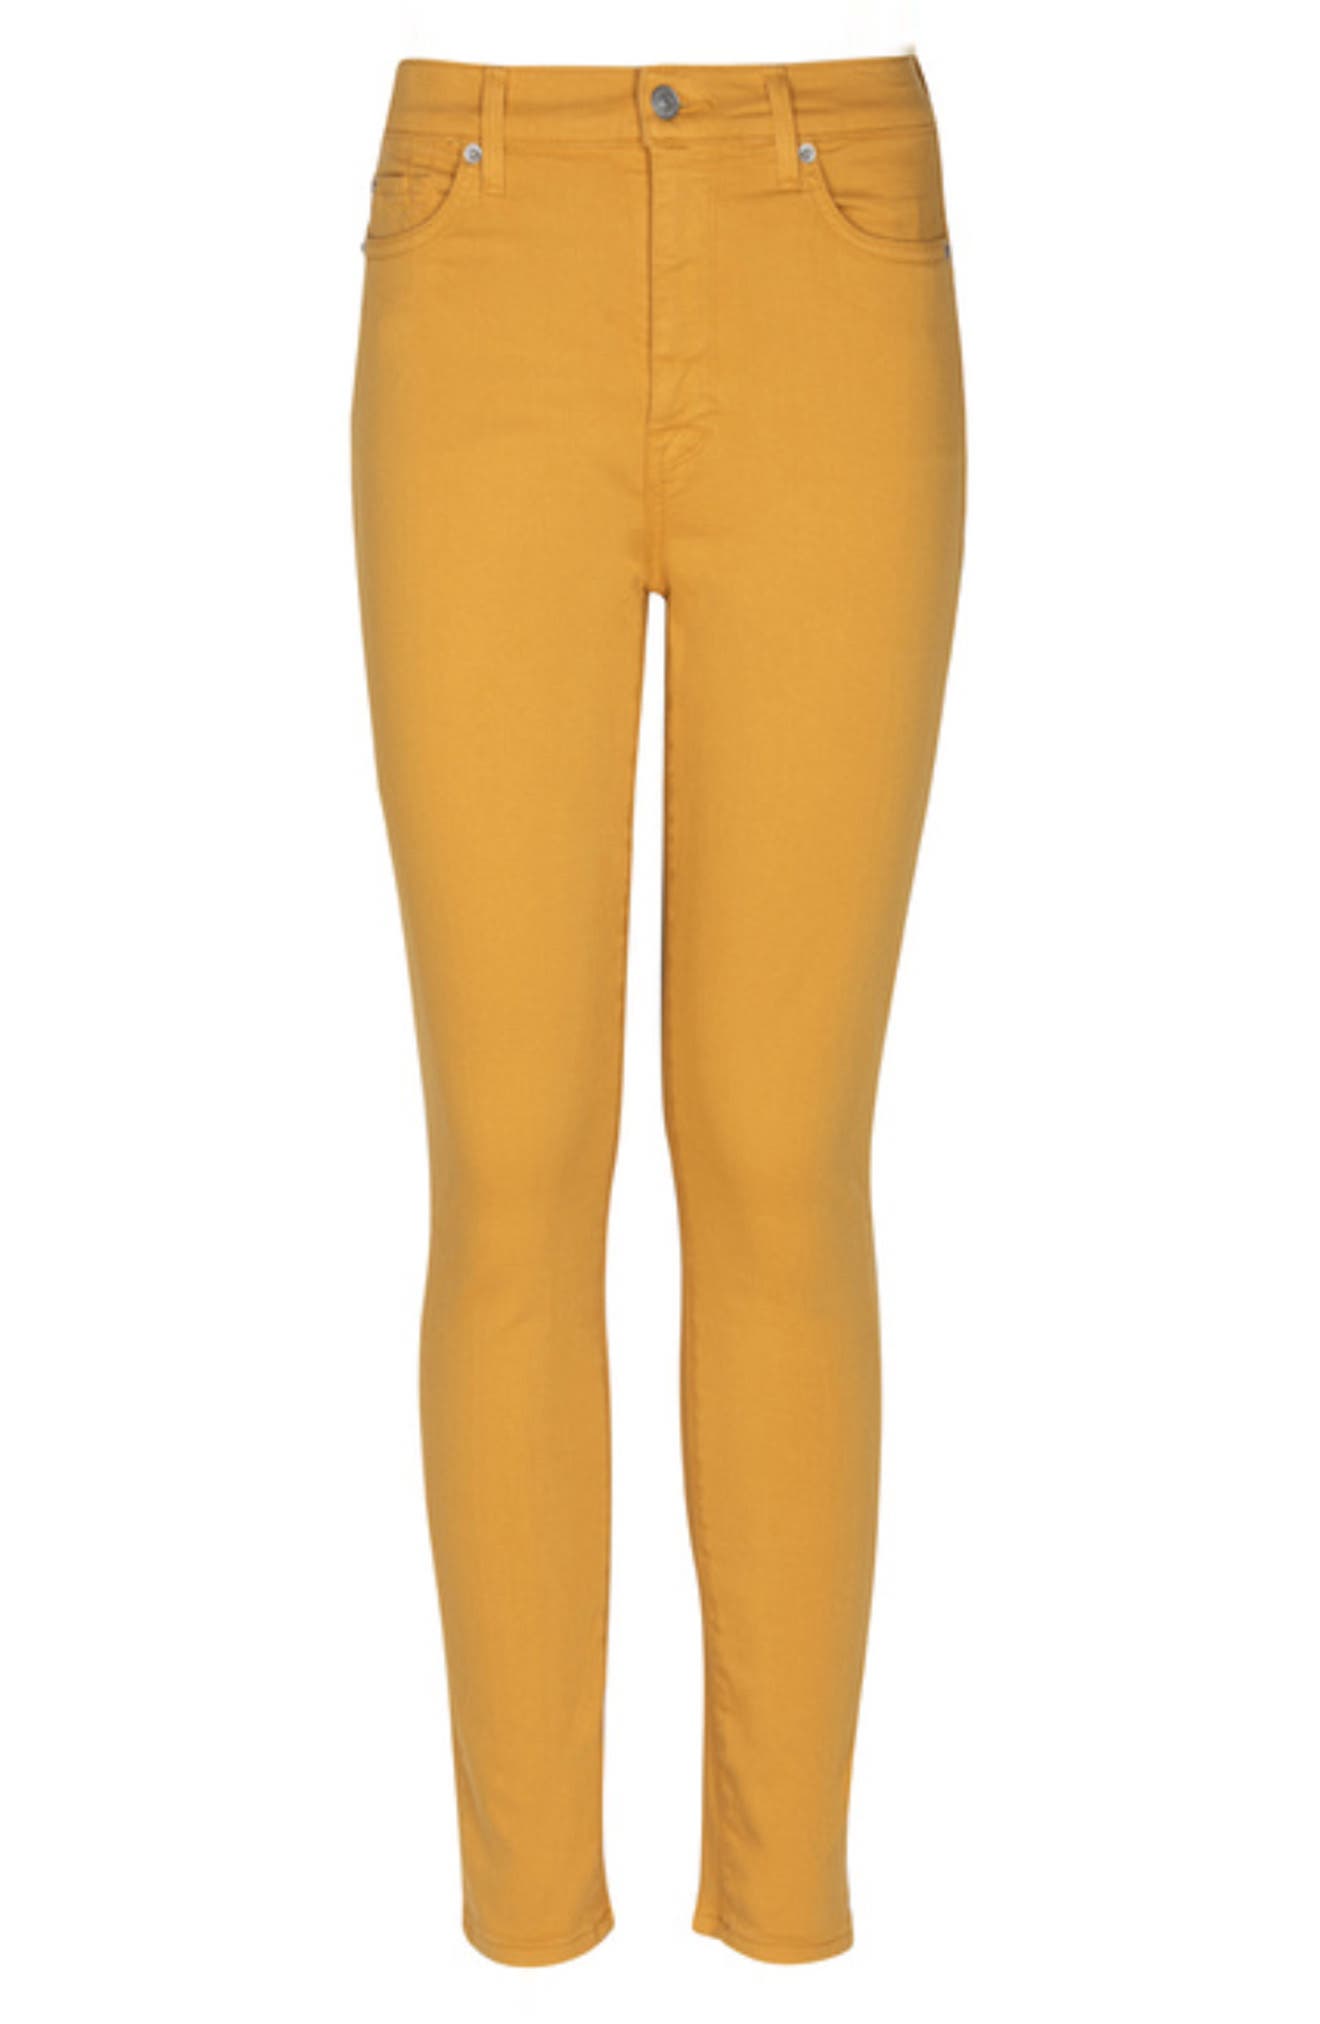 7 for all mankind yellow jeans